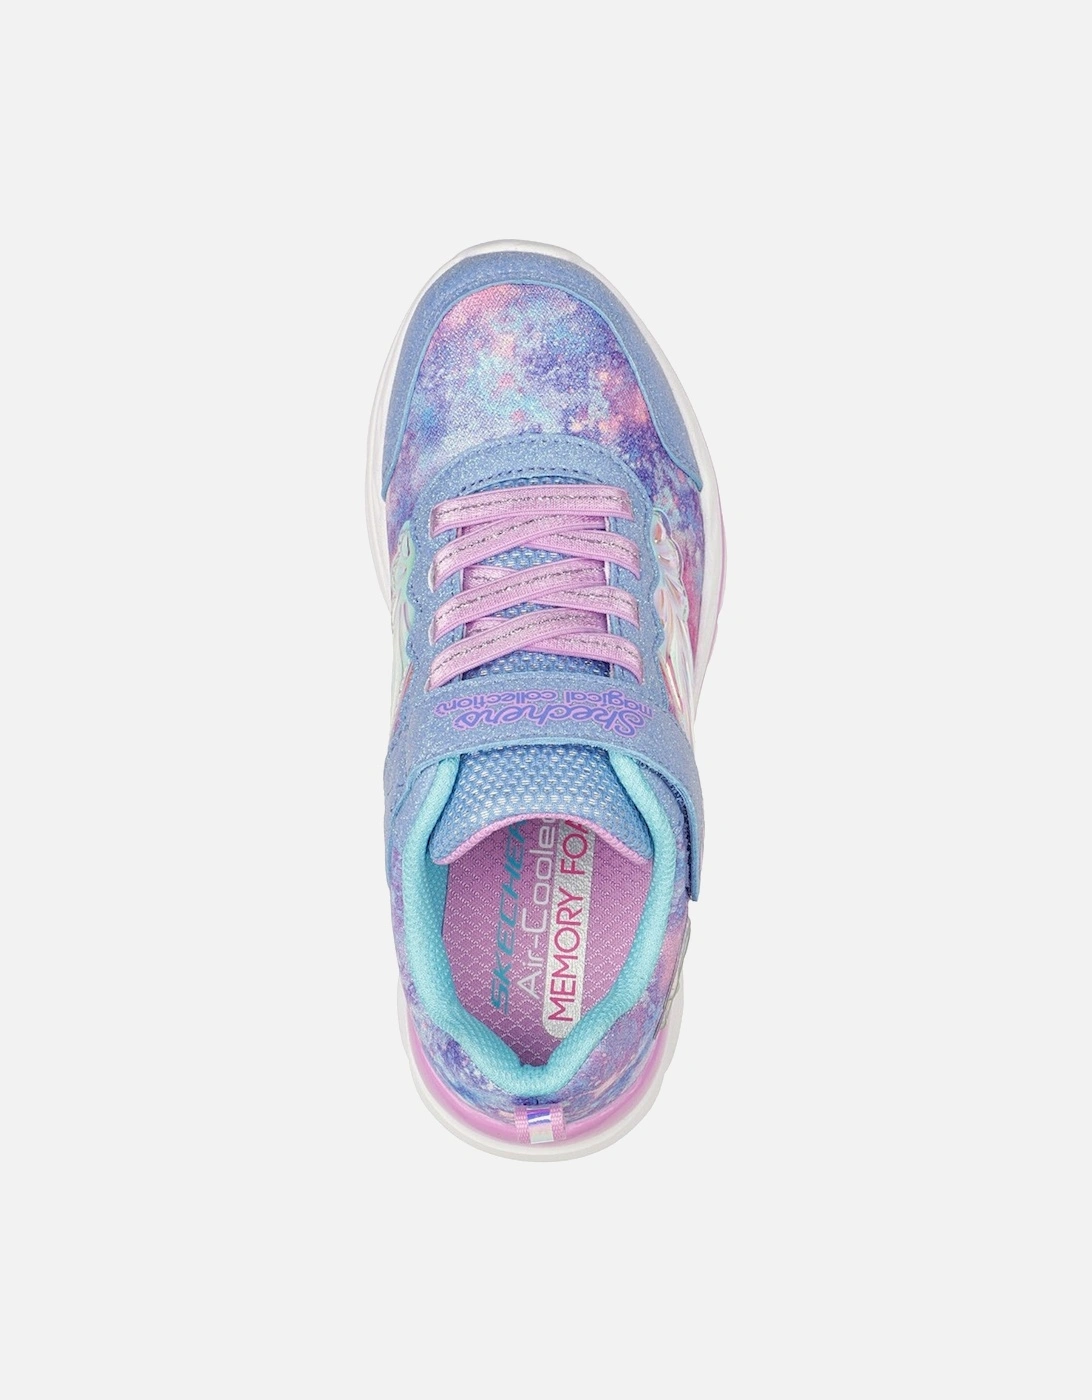 Girls Quick Kicks Flying Beauty Lace Up Shoes